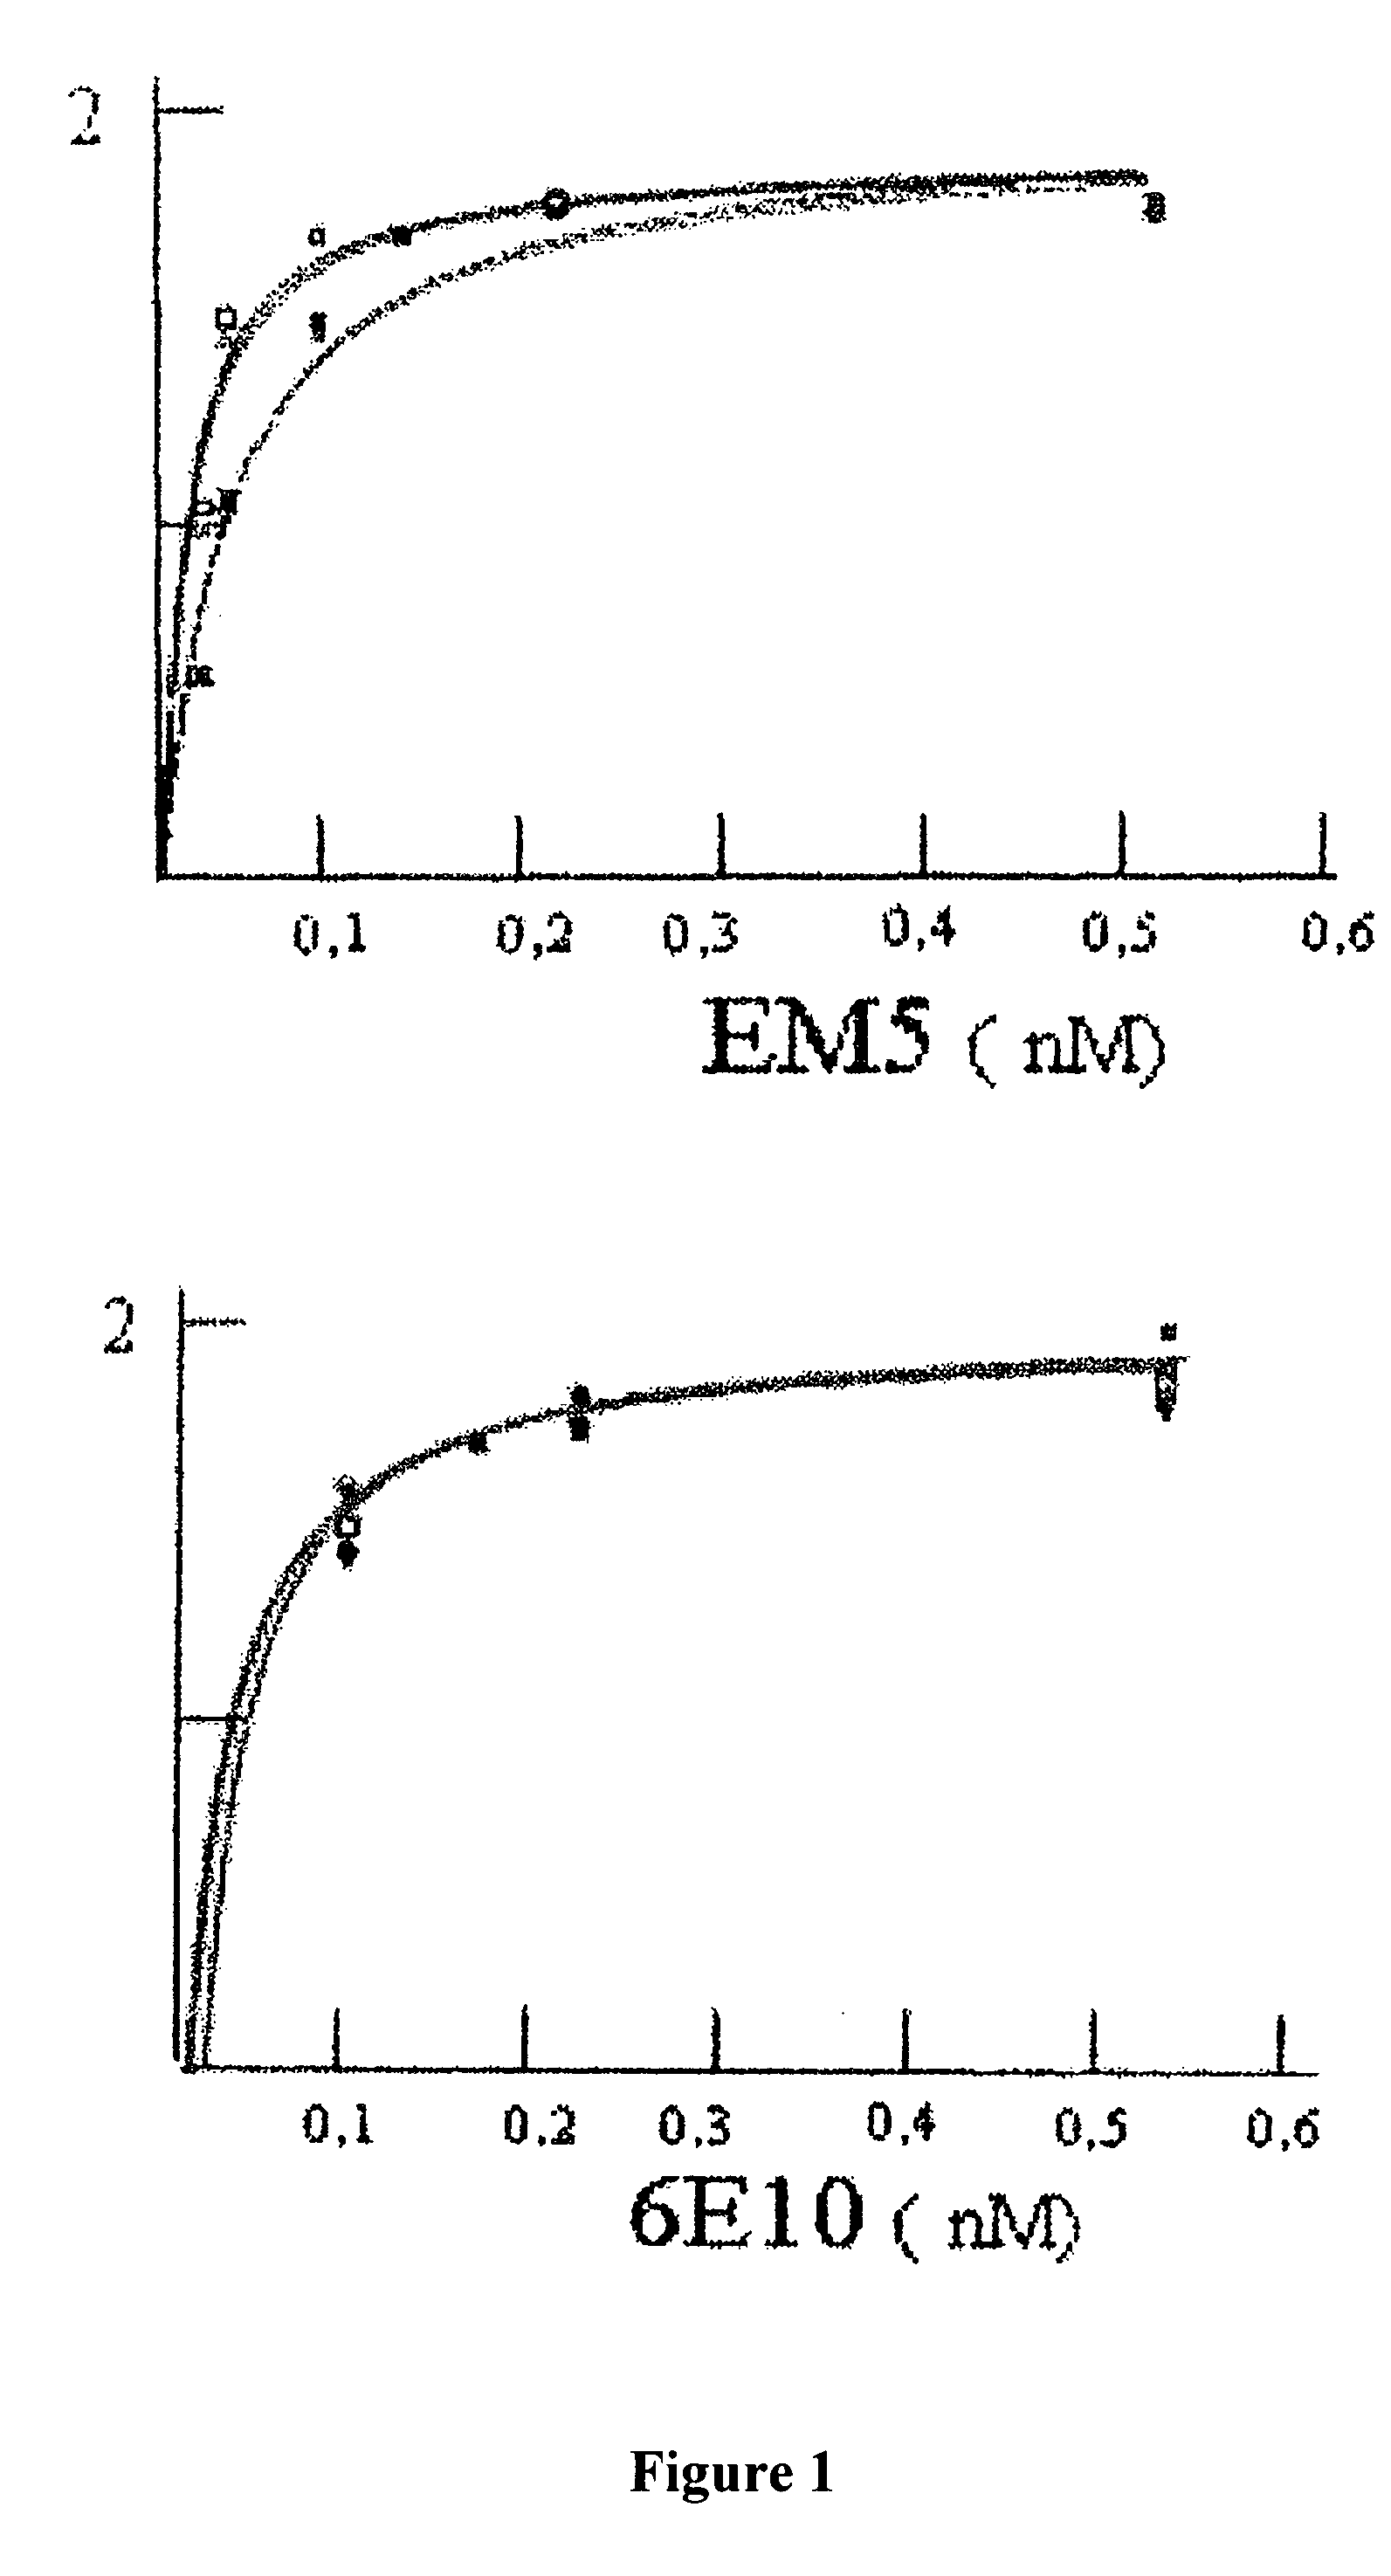 Method for the in vitro diagnosis of alzheimer's disease using a monoclonal antibody